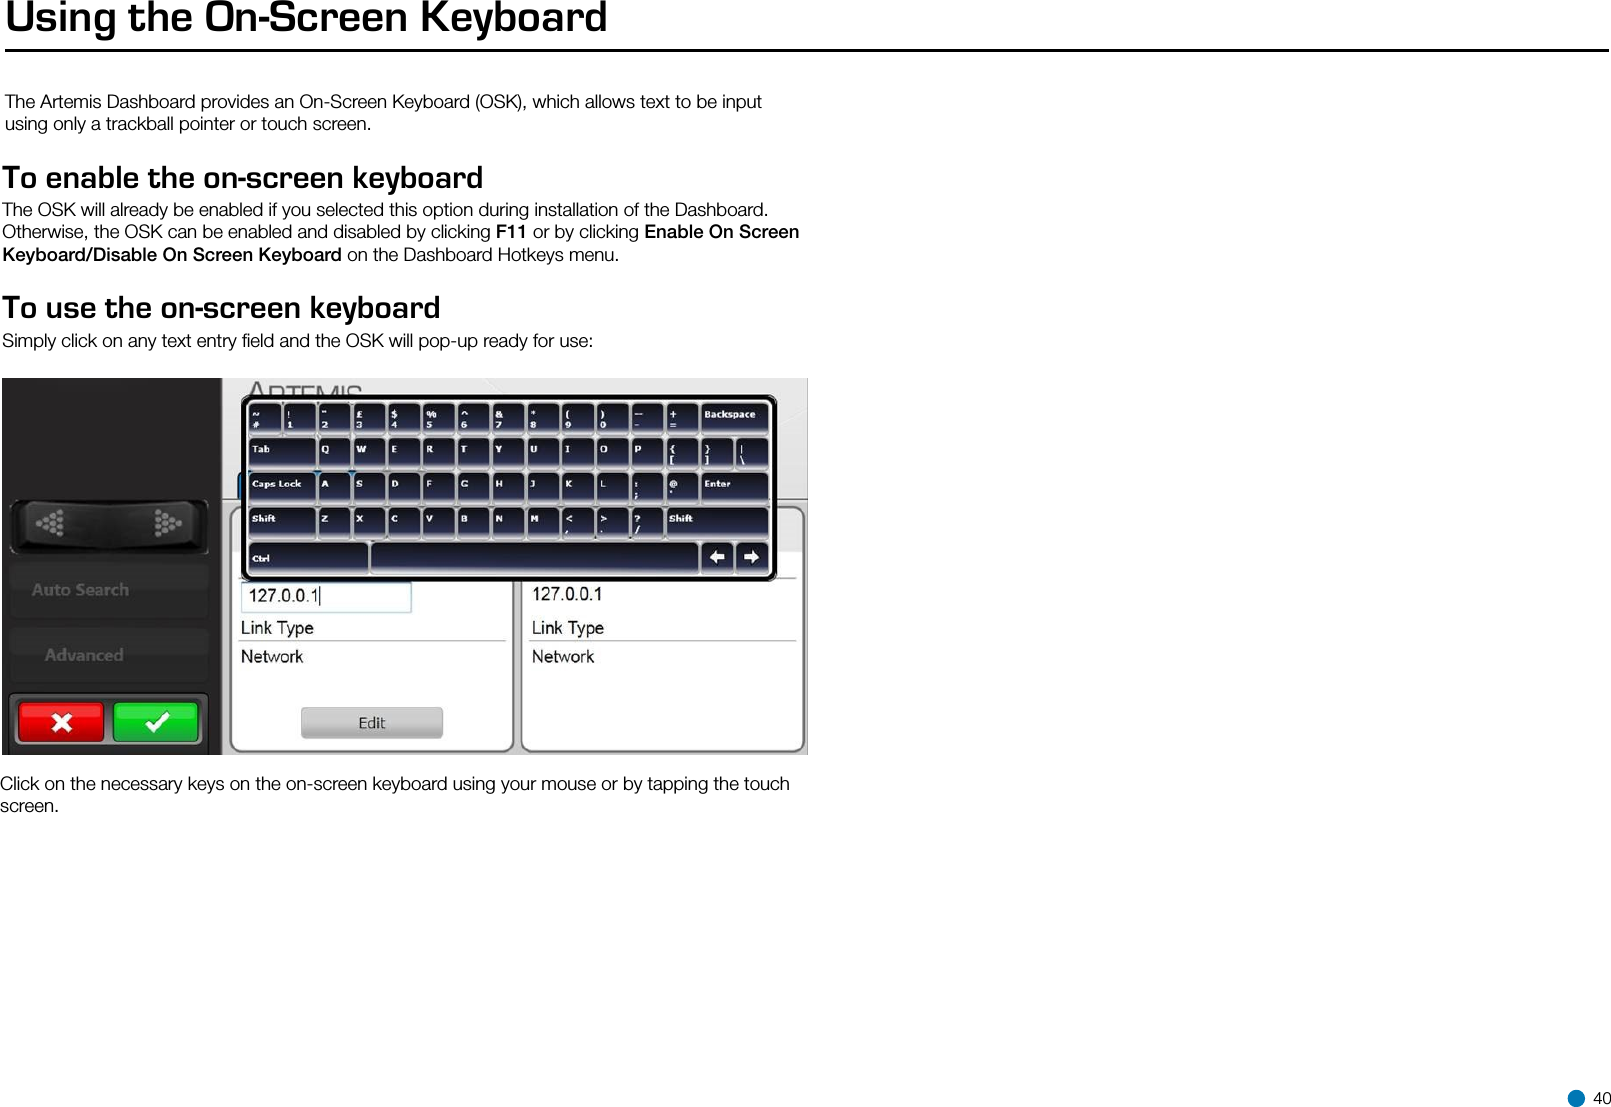 Using the On-Screen KeyboardThe Artemis Dashboard provides an On-Screen Keyboard (OSK), which allows text to be input using only a trackball pointer or touch screen.To enable the on-screen keyboard The OSK will already be enabled if you selected this option during installation of the Dashboard.Otherwise, the OSK can be enabled and disabled by clicking F11 or by clicking Enable On Screen Keyboard/Disable On Screen Keyboard on the Dashboard Hotkeys menu.To use the on-screen keyboard Simply click on any text entry ﬁeld and the OSK will pop-up ready for use:Click on the necessary keys on the on-screen keyboard using your mouse or by tapping the touch screen. 40